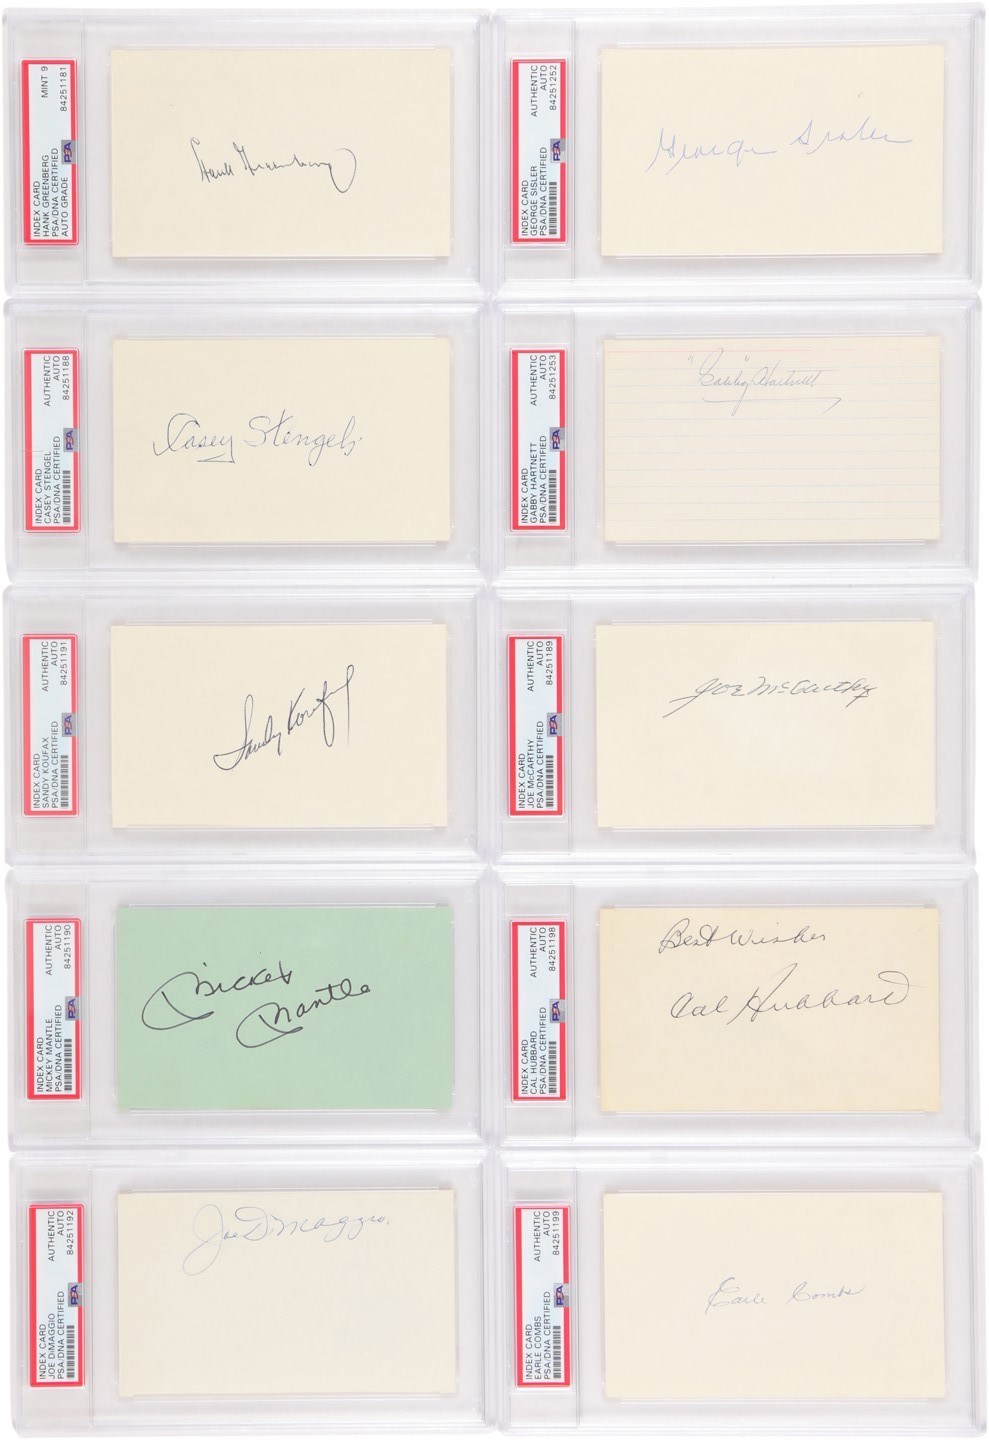 - Baseball Hall of Famers PSA Authenticated Signed Index Card Archive (77)